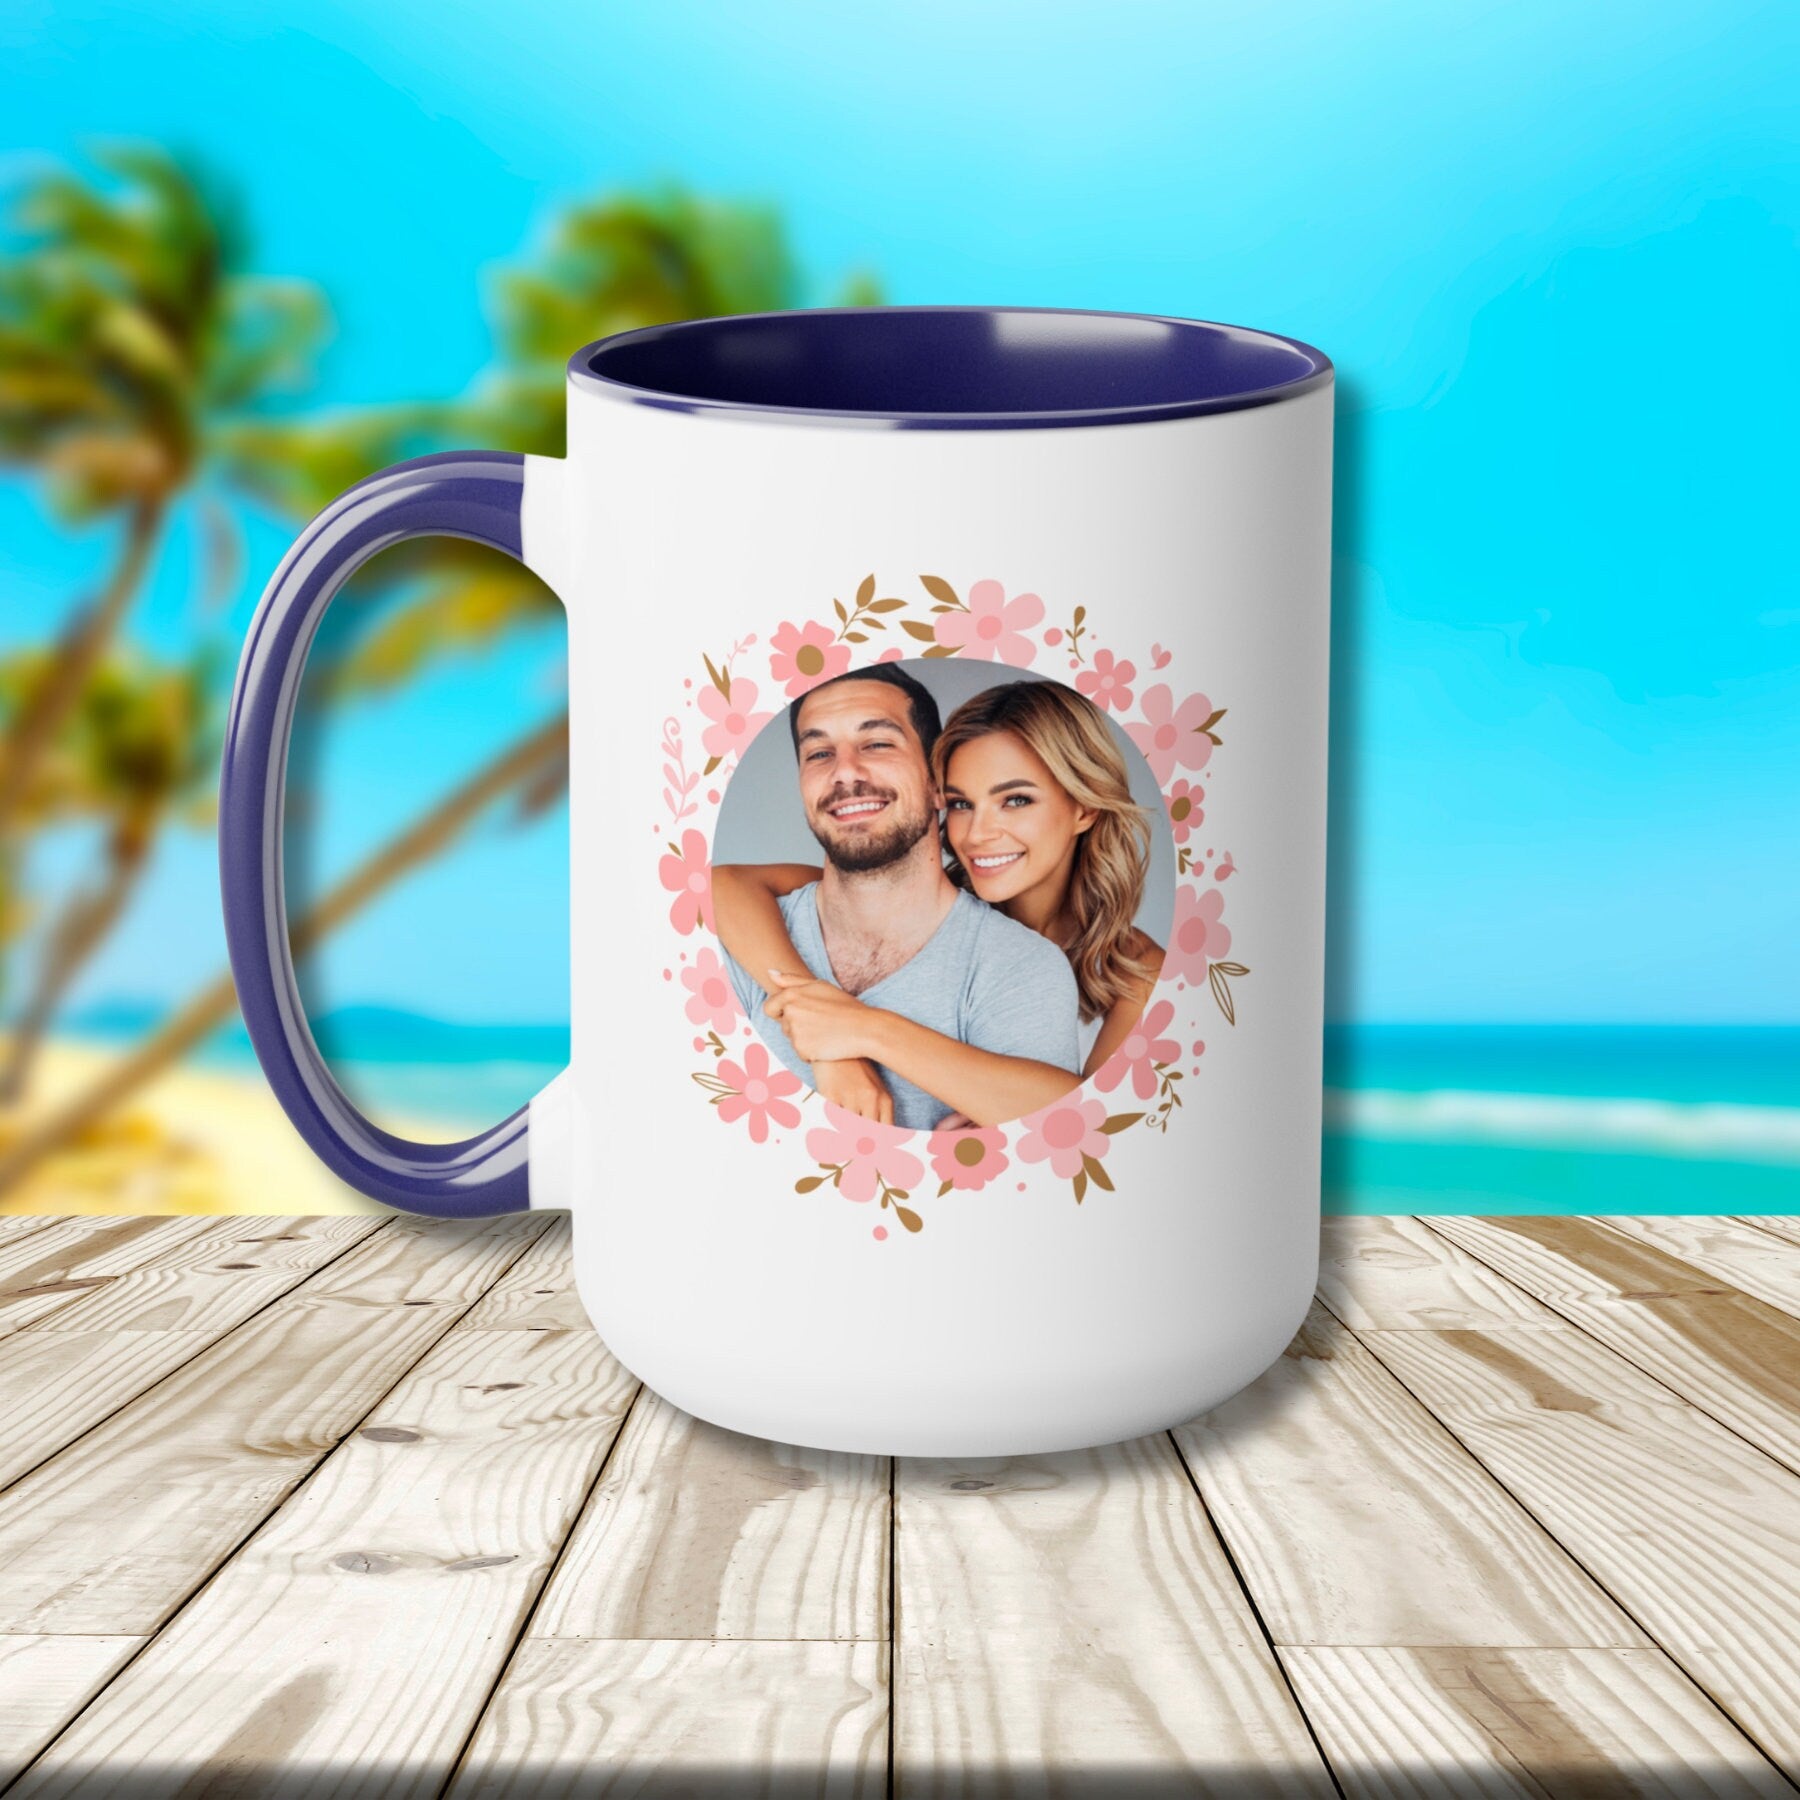 Personalized Custom Photo Coffee Mug with Floral Photo and Text Mom Mama Mum Husband Dad Father Wife Her Him Grandma Family Birthday Gift